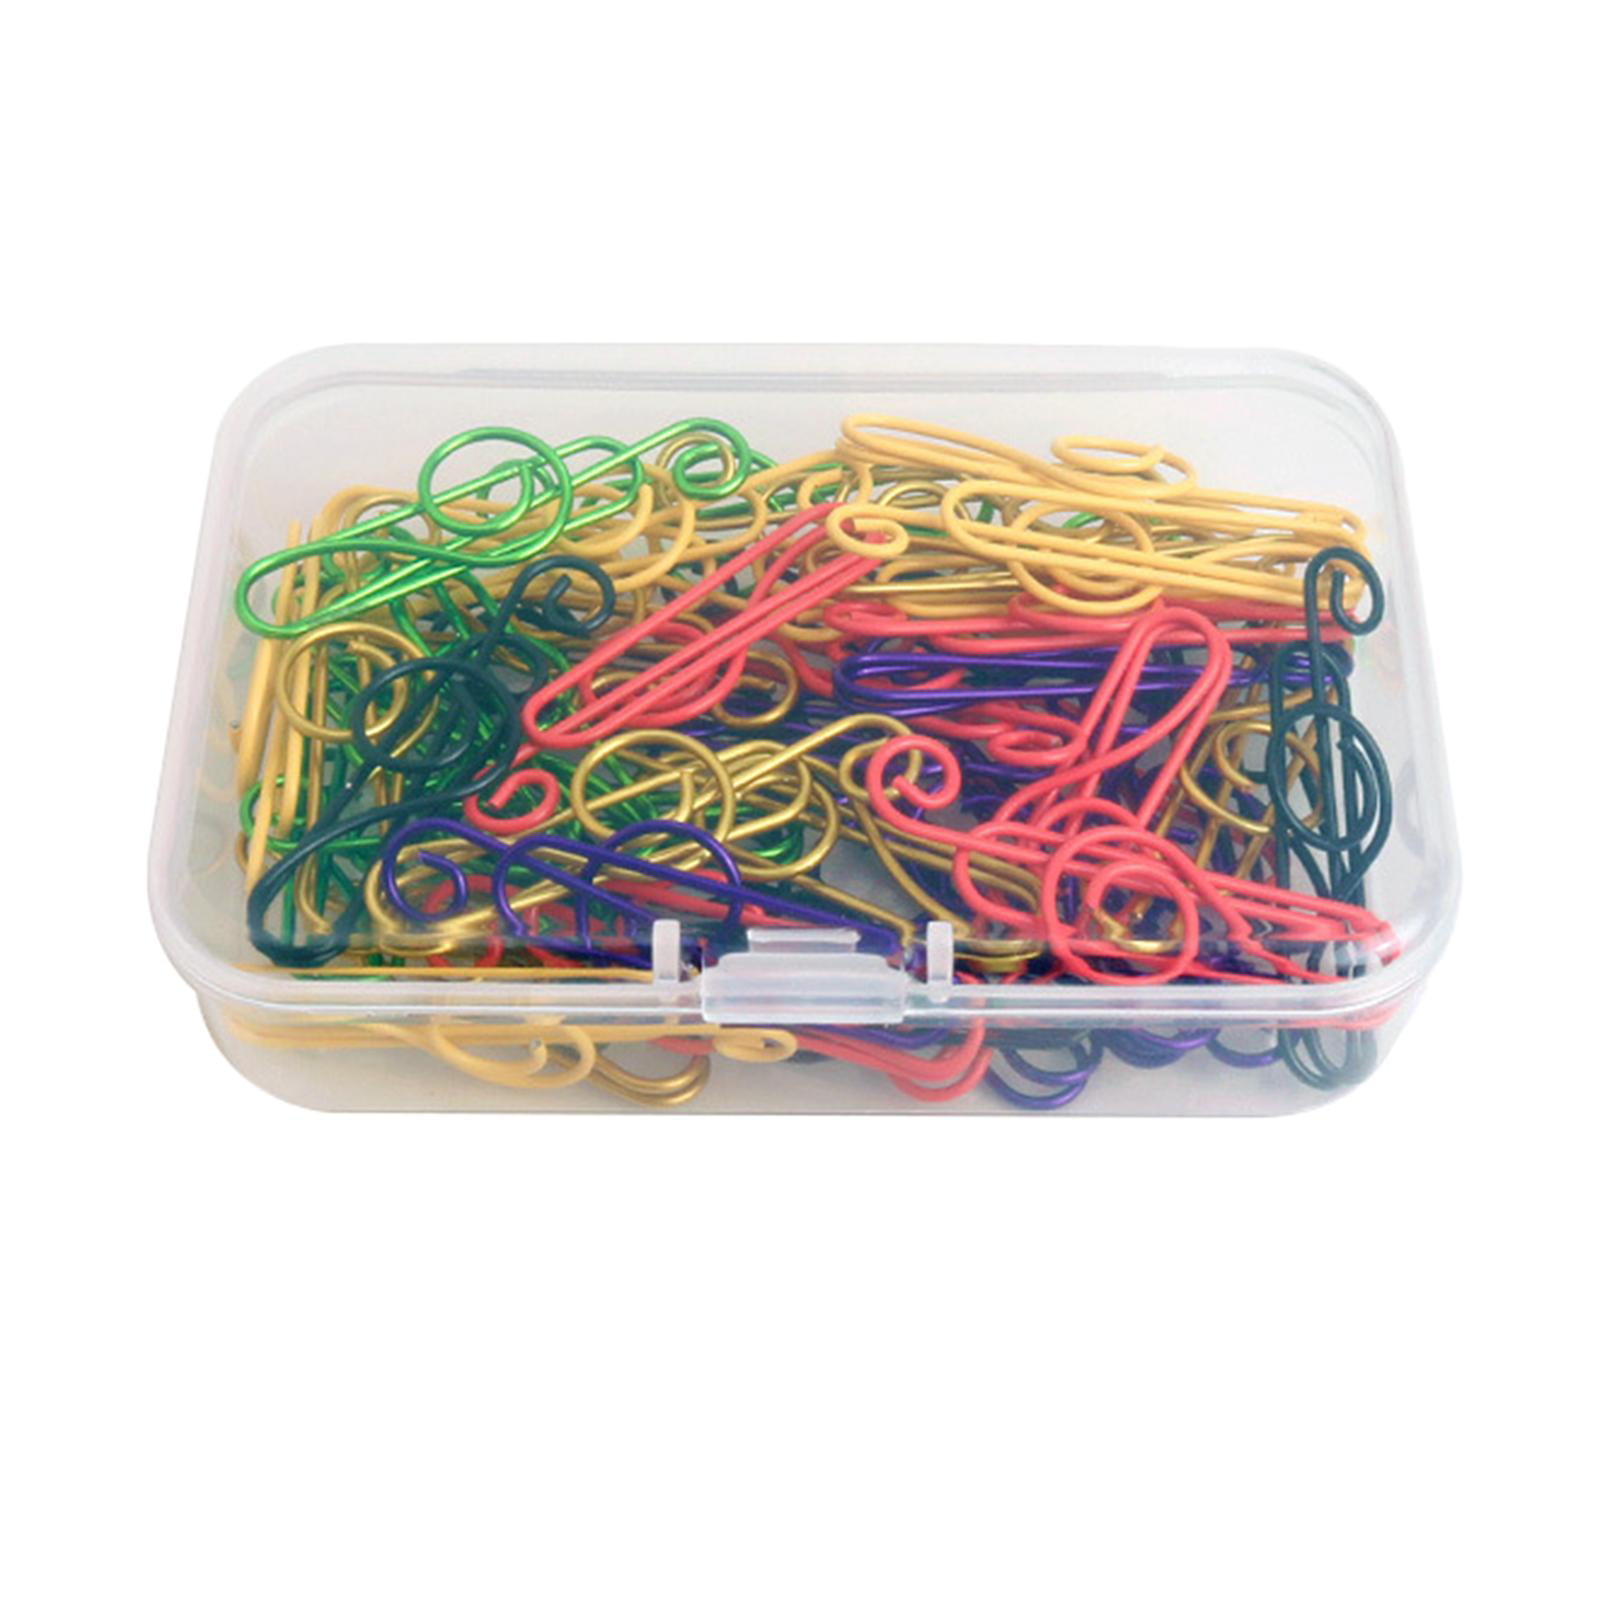 1 Box, 100Pcs hefeilzmy Metal Paper Clips Plastic Coated Paperclips Colored Paper Clip Holder for Office School Students